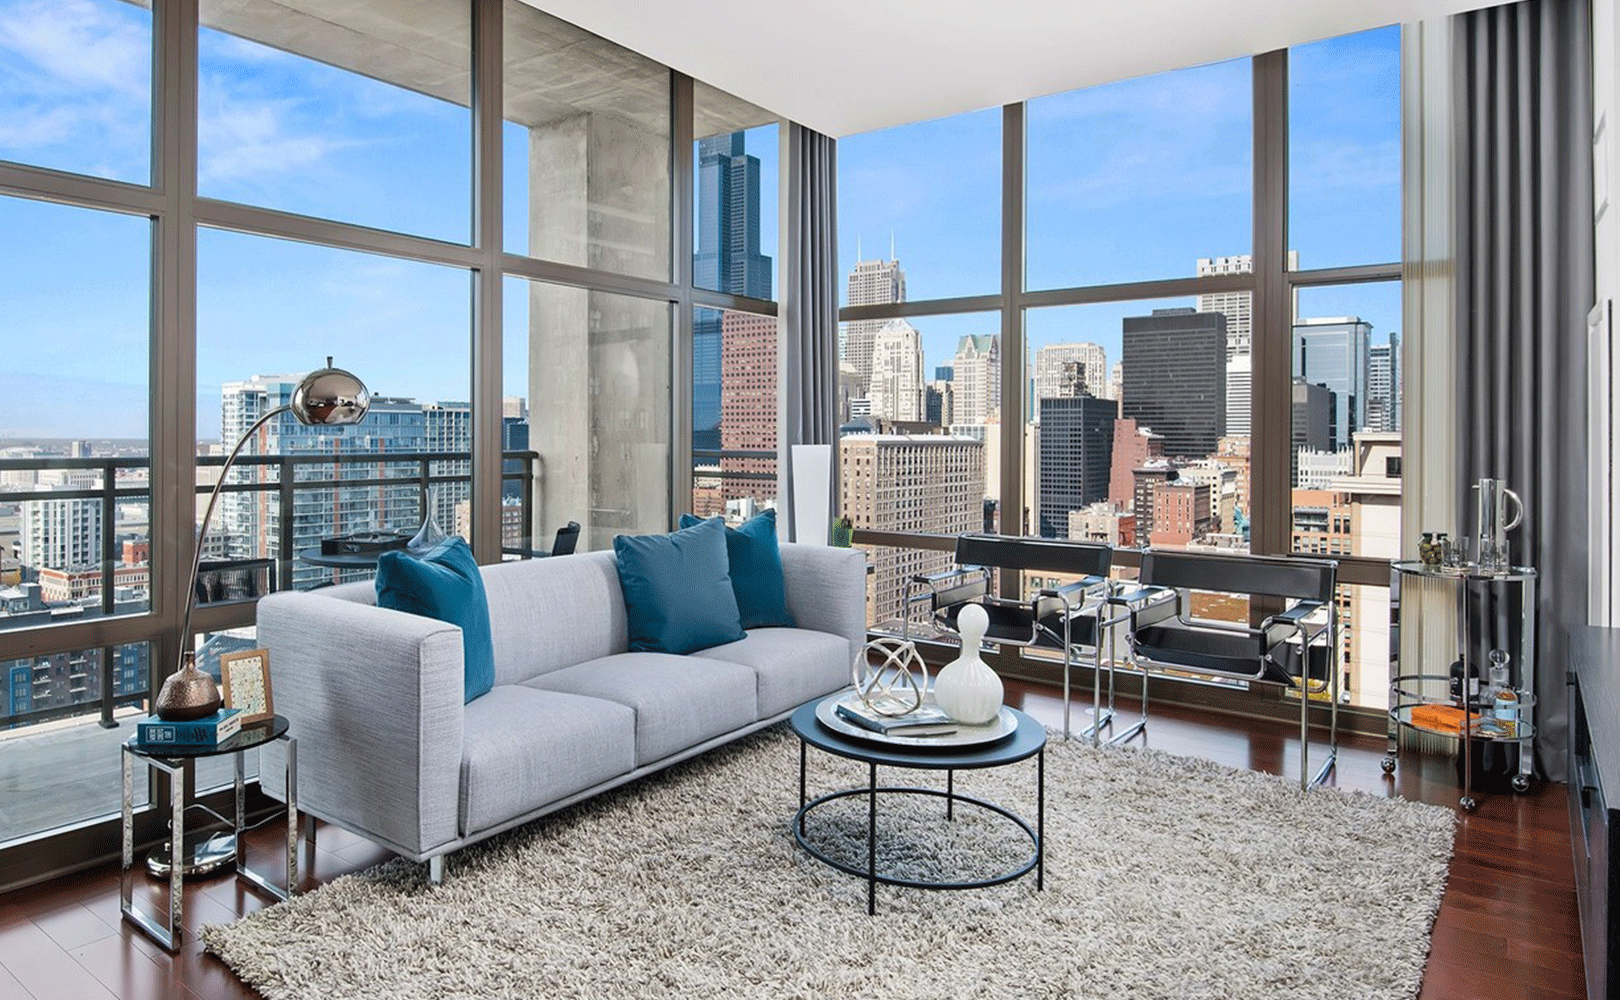 Living area of Astoria Tower apartment with floor to ceiling windows overlooking the south loop of Chicago